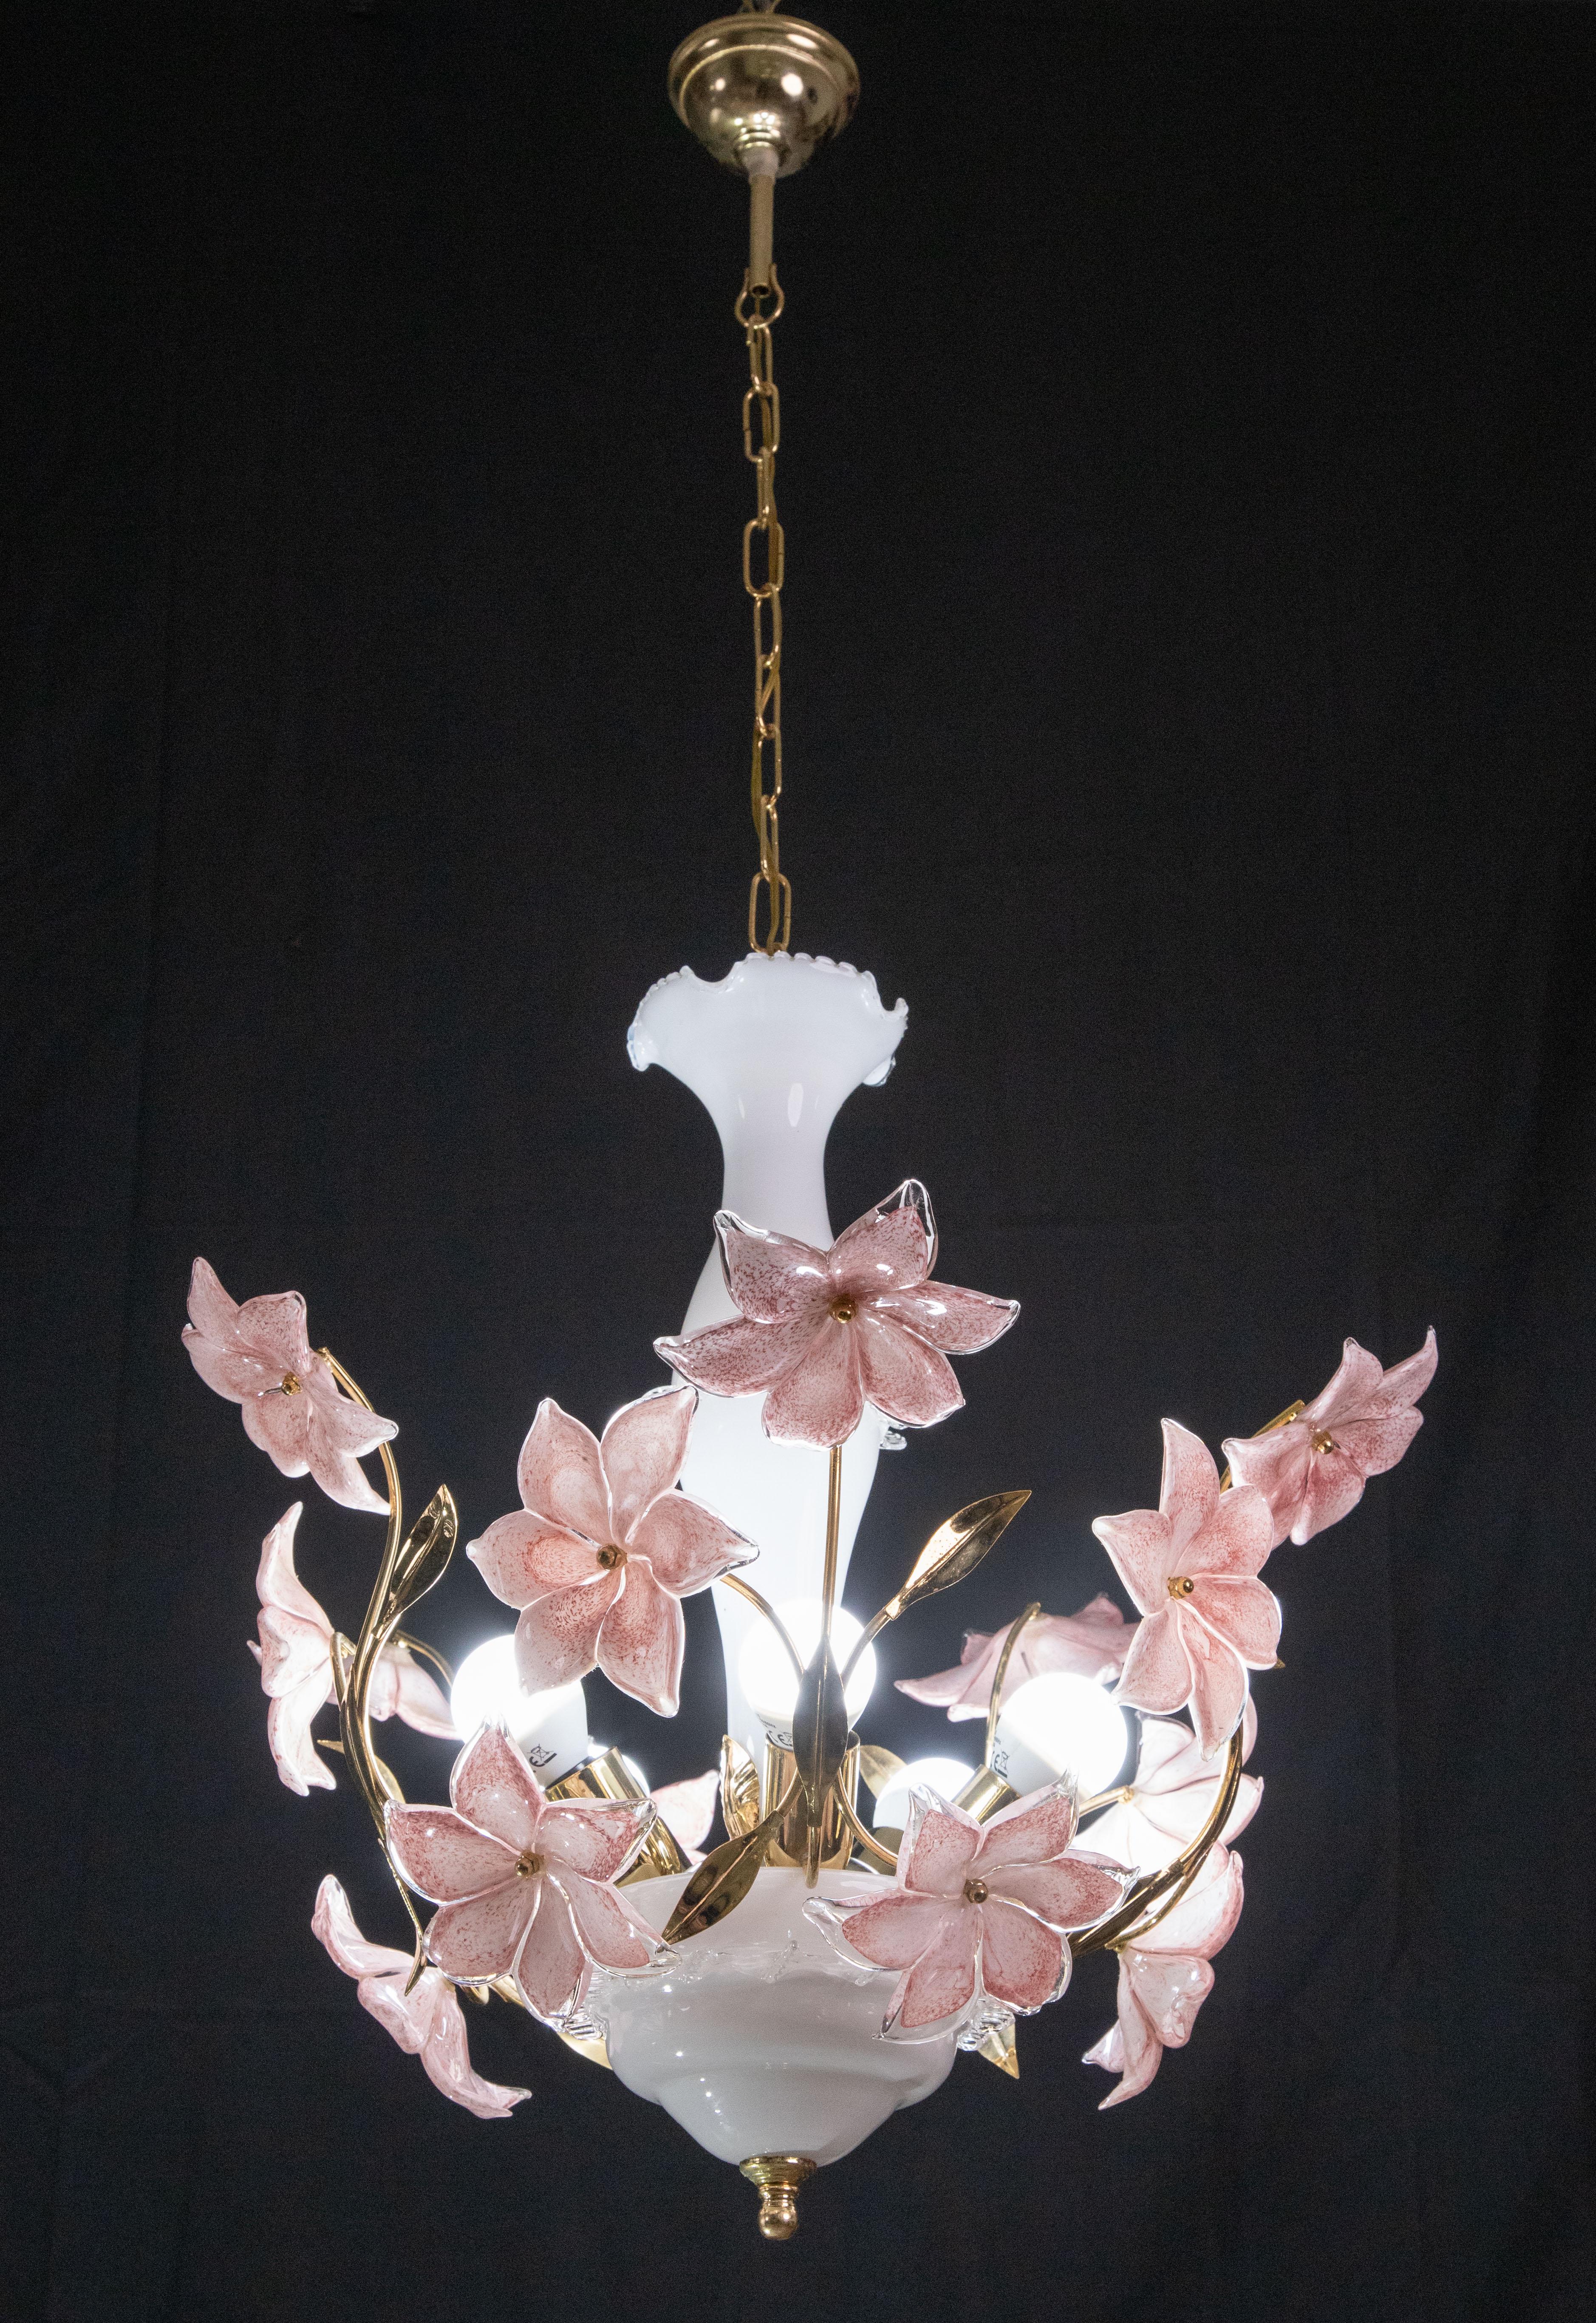 Vintage Murano glass chandelier with pink flowers.
The chandelier has 5 light point with E14 socket.
The frame is made of gold bath and has some signs of time.
The height of the chandelier is 95 cm, the diameter is 50 cm, the height without chain